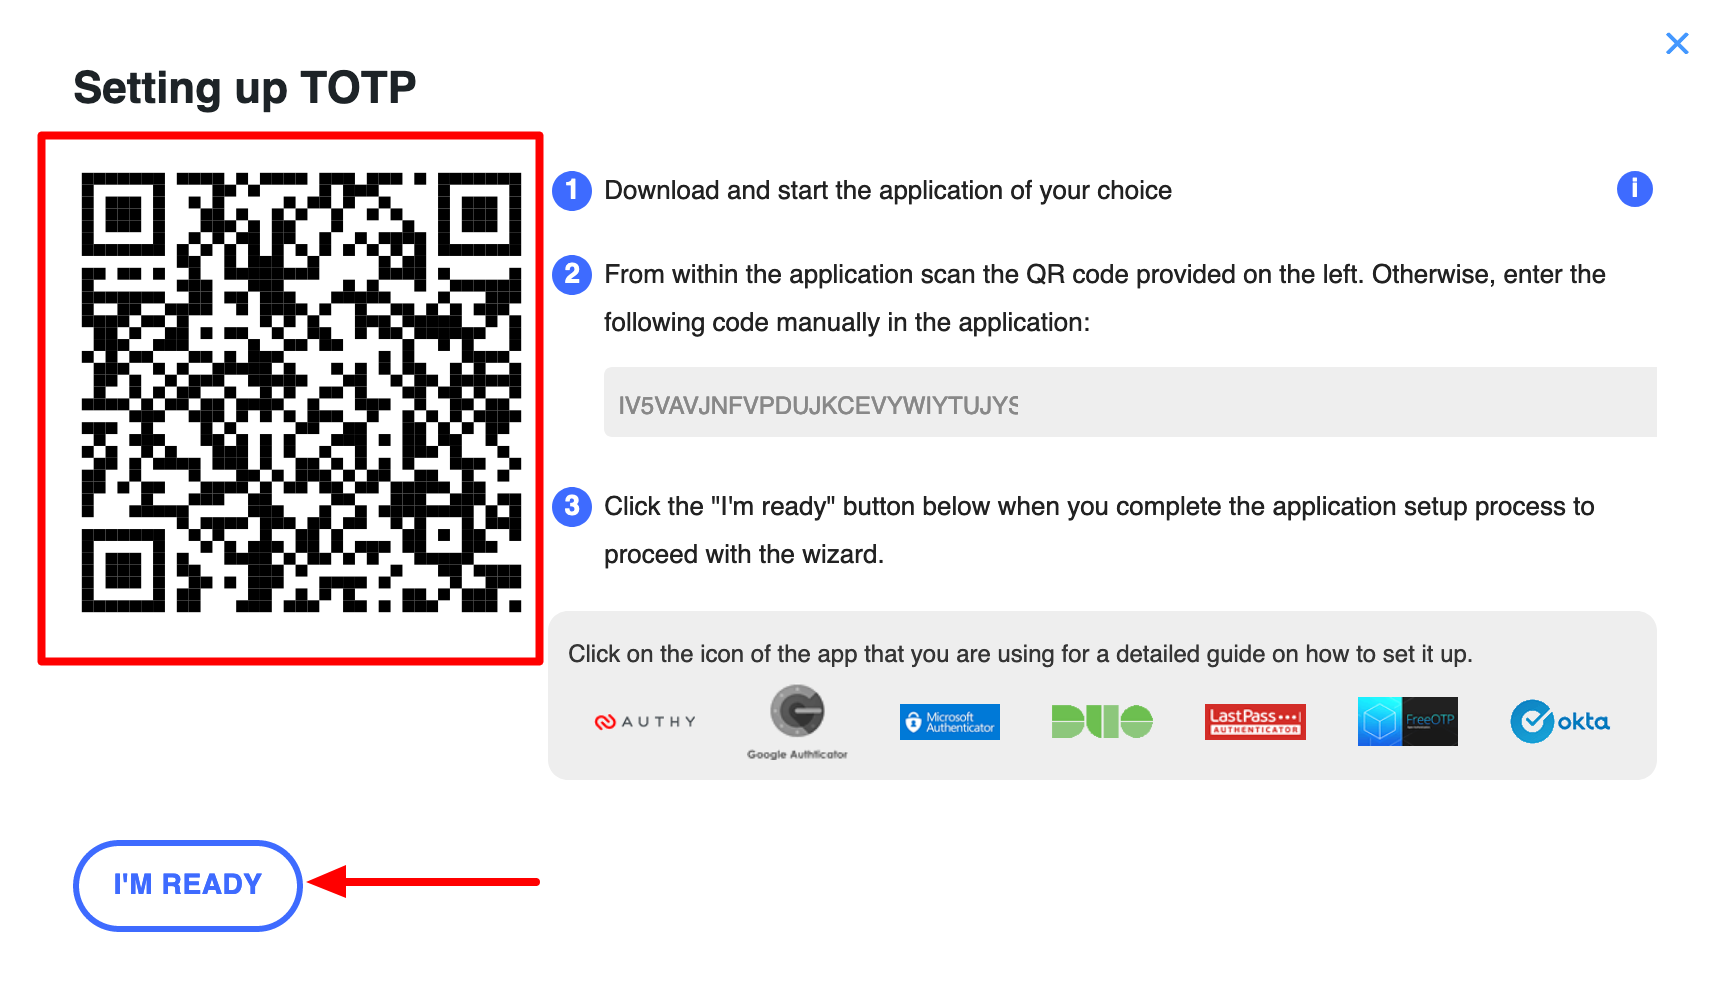 WP 2FA includes a smart code to set up the authentication app.